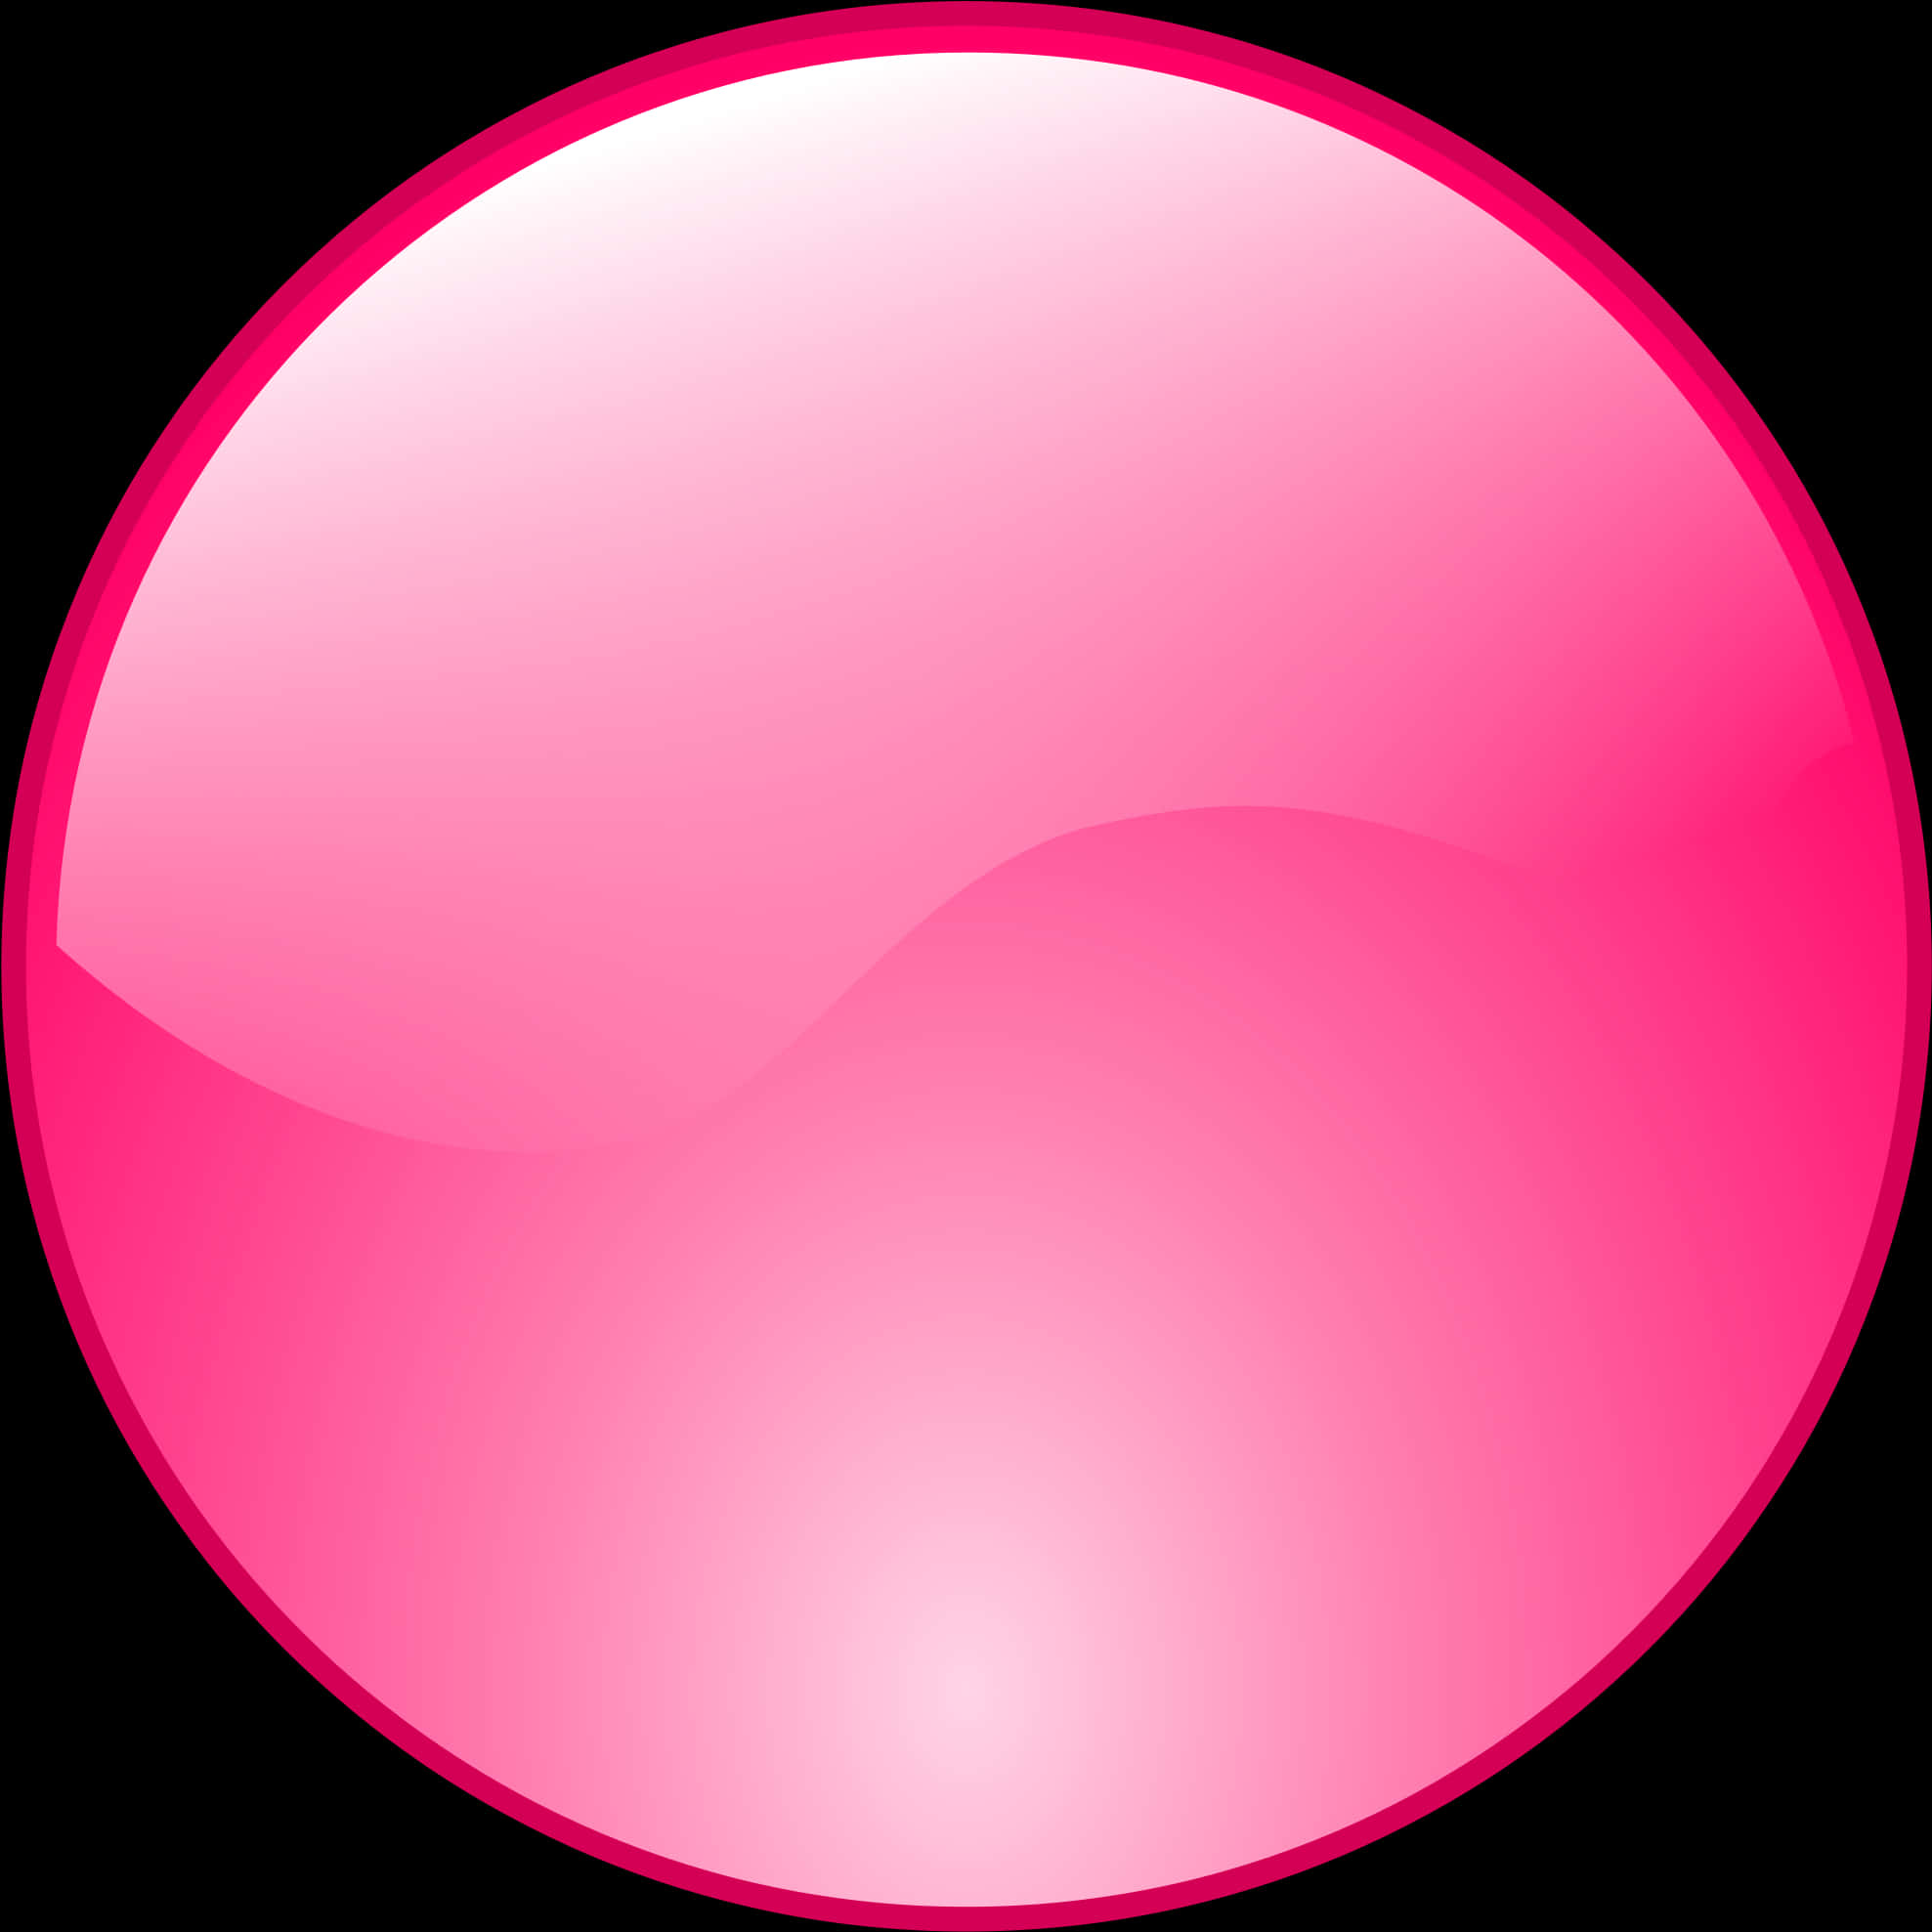 Abstract Pink Sphere Graphic PNG image